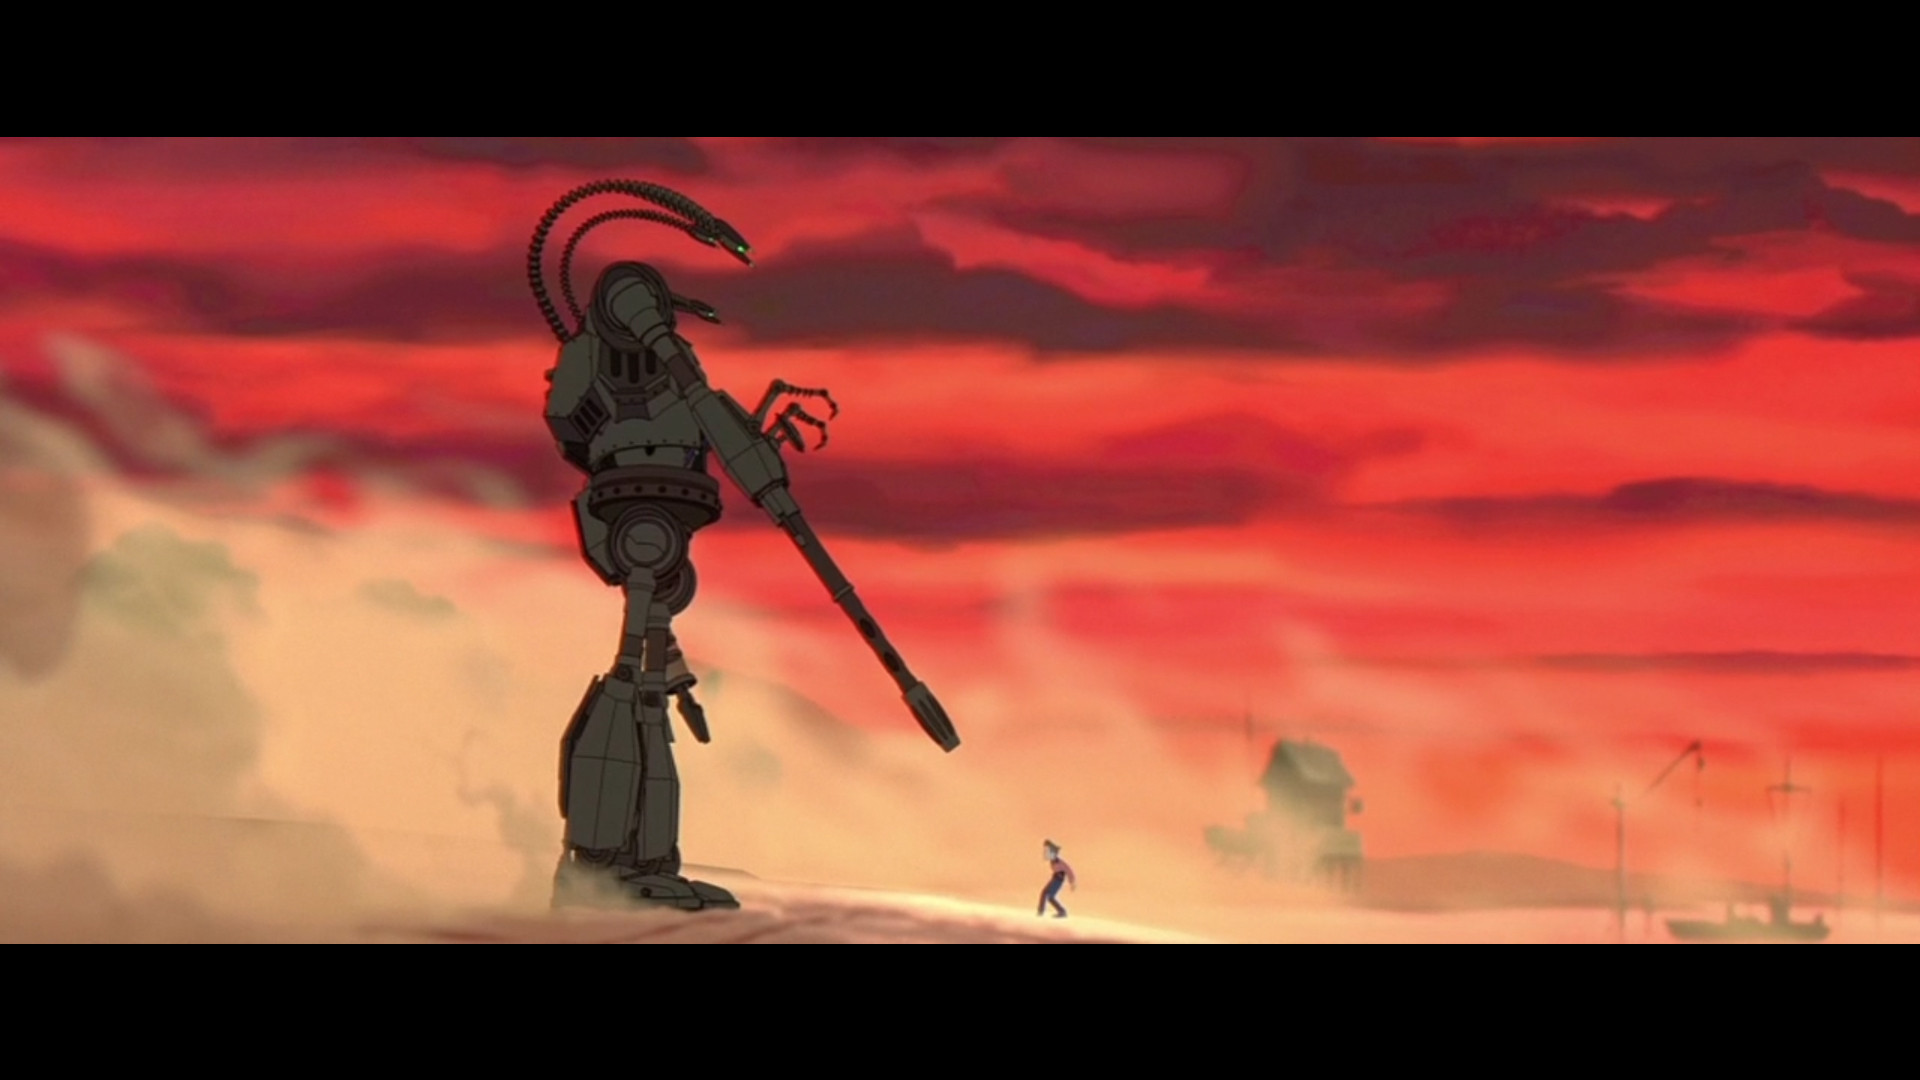 1920x1080 Couldn't find this frame from The Iron Giant so here's a 1080p screen .